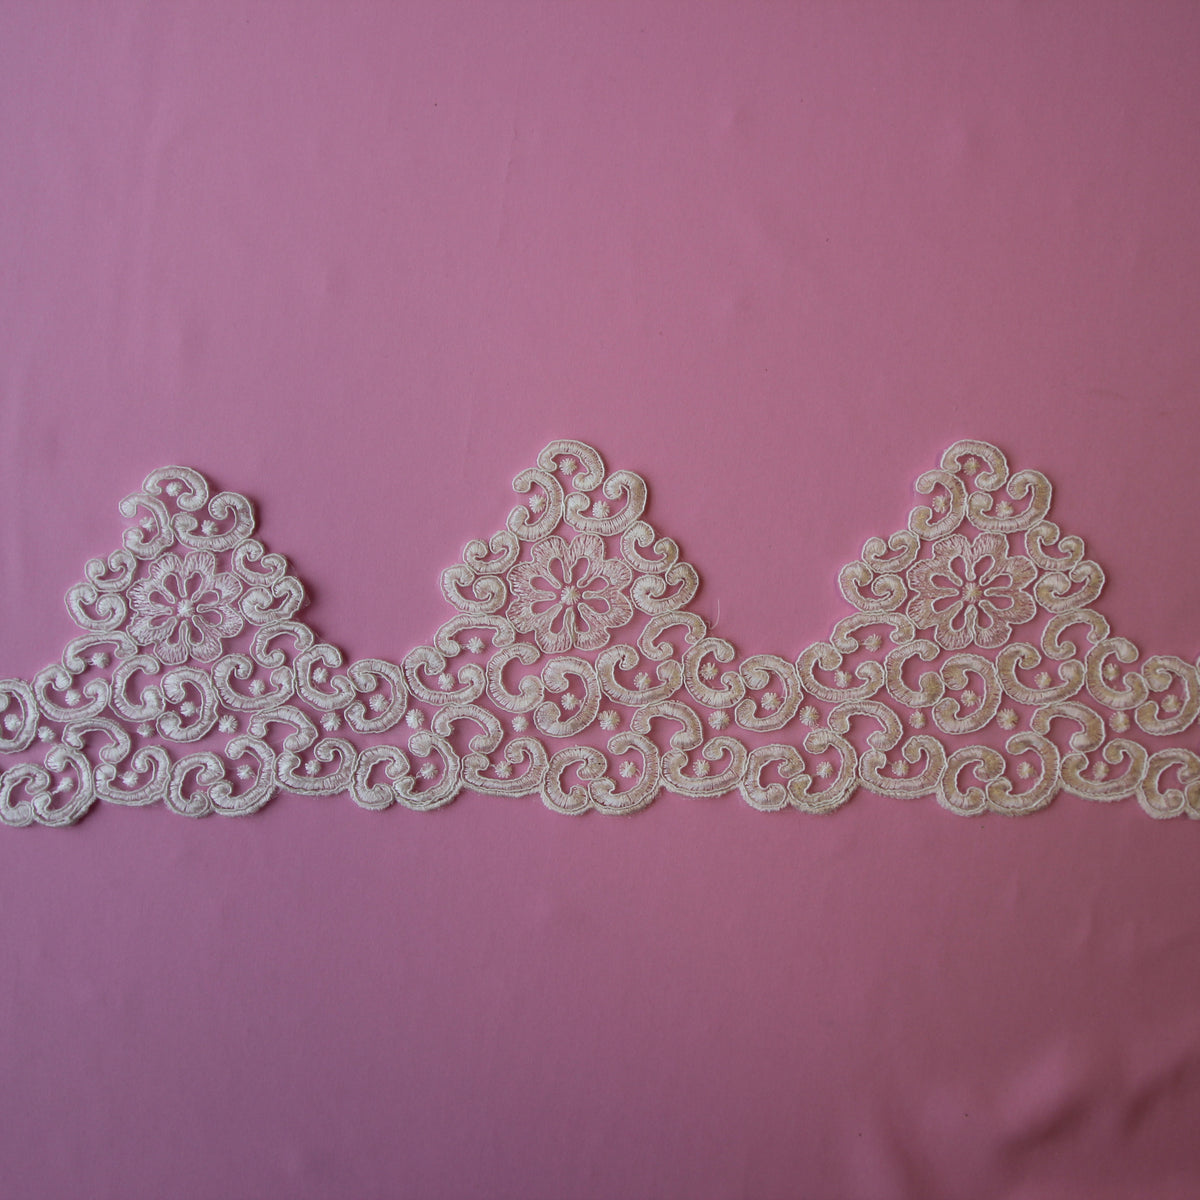  Sewing Lace - Orange / Sewing Lace / Sewing Trim &  Embellishments: Arts, Crafts & Sewing